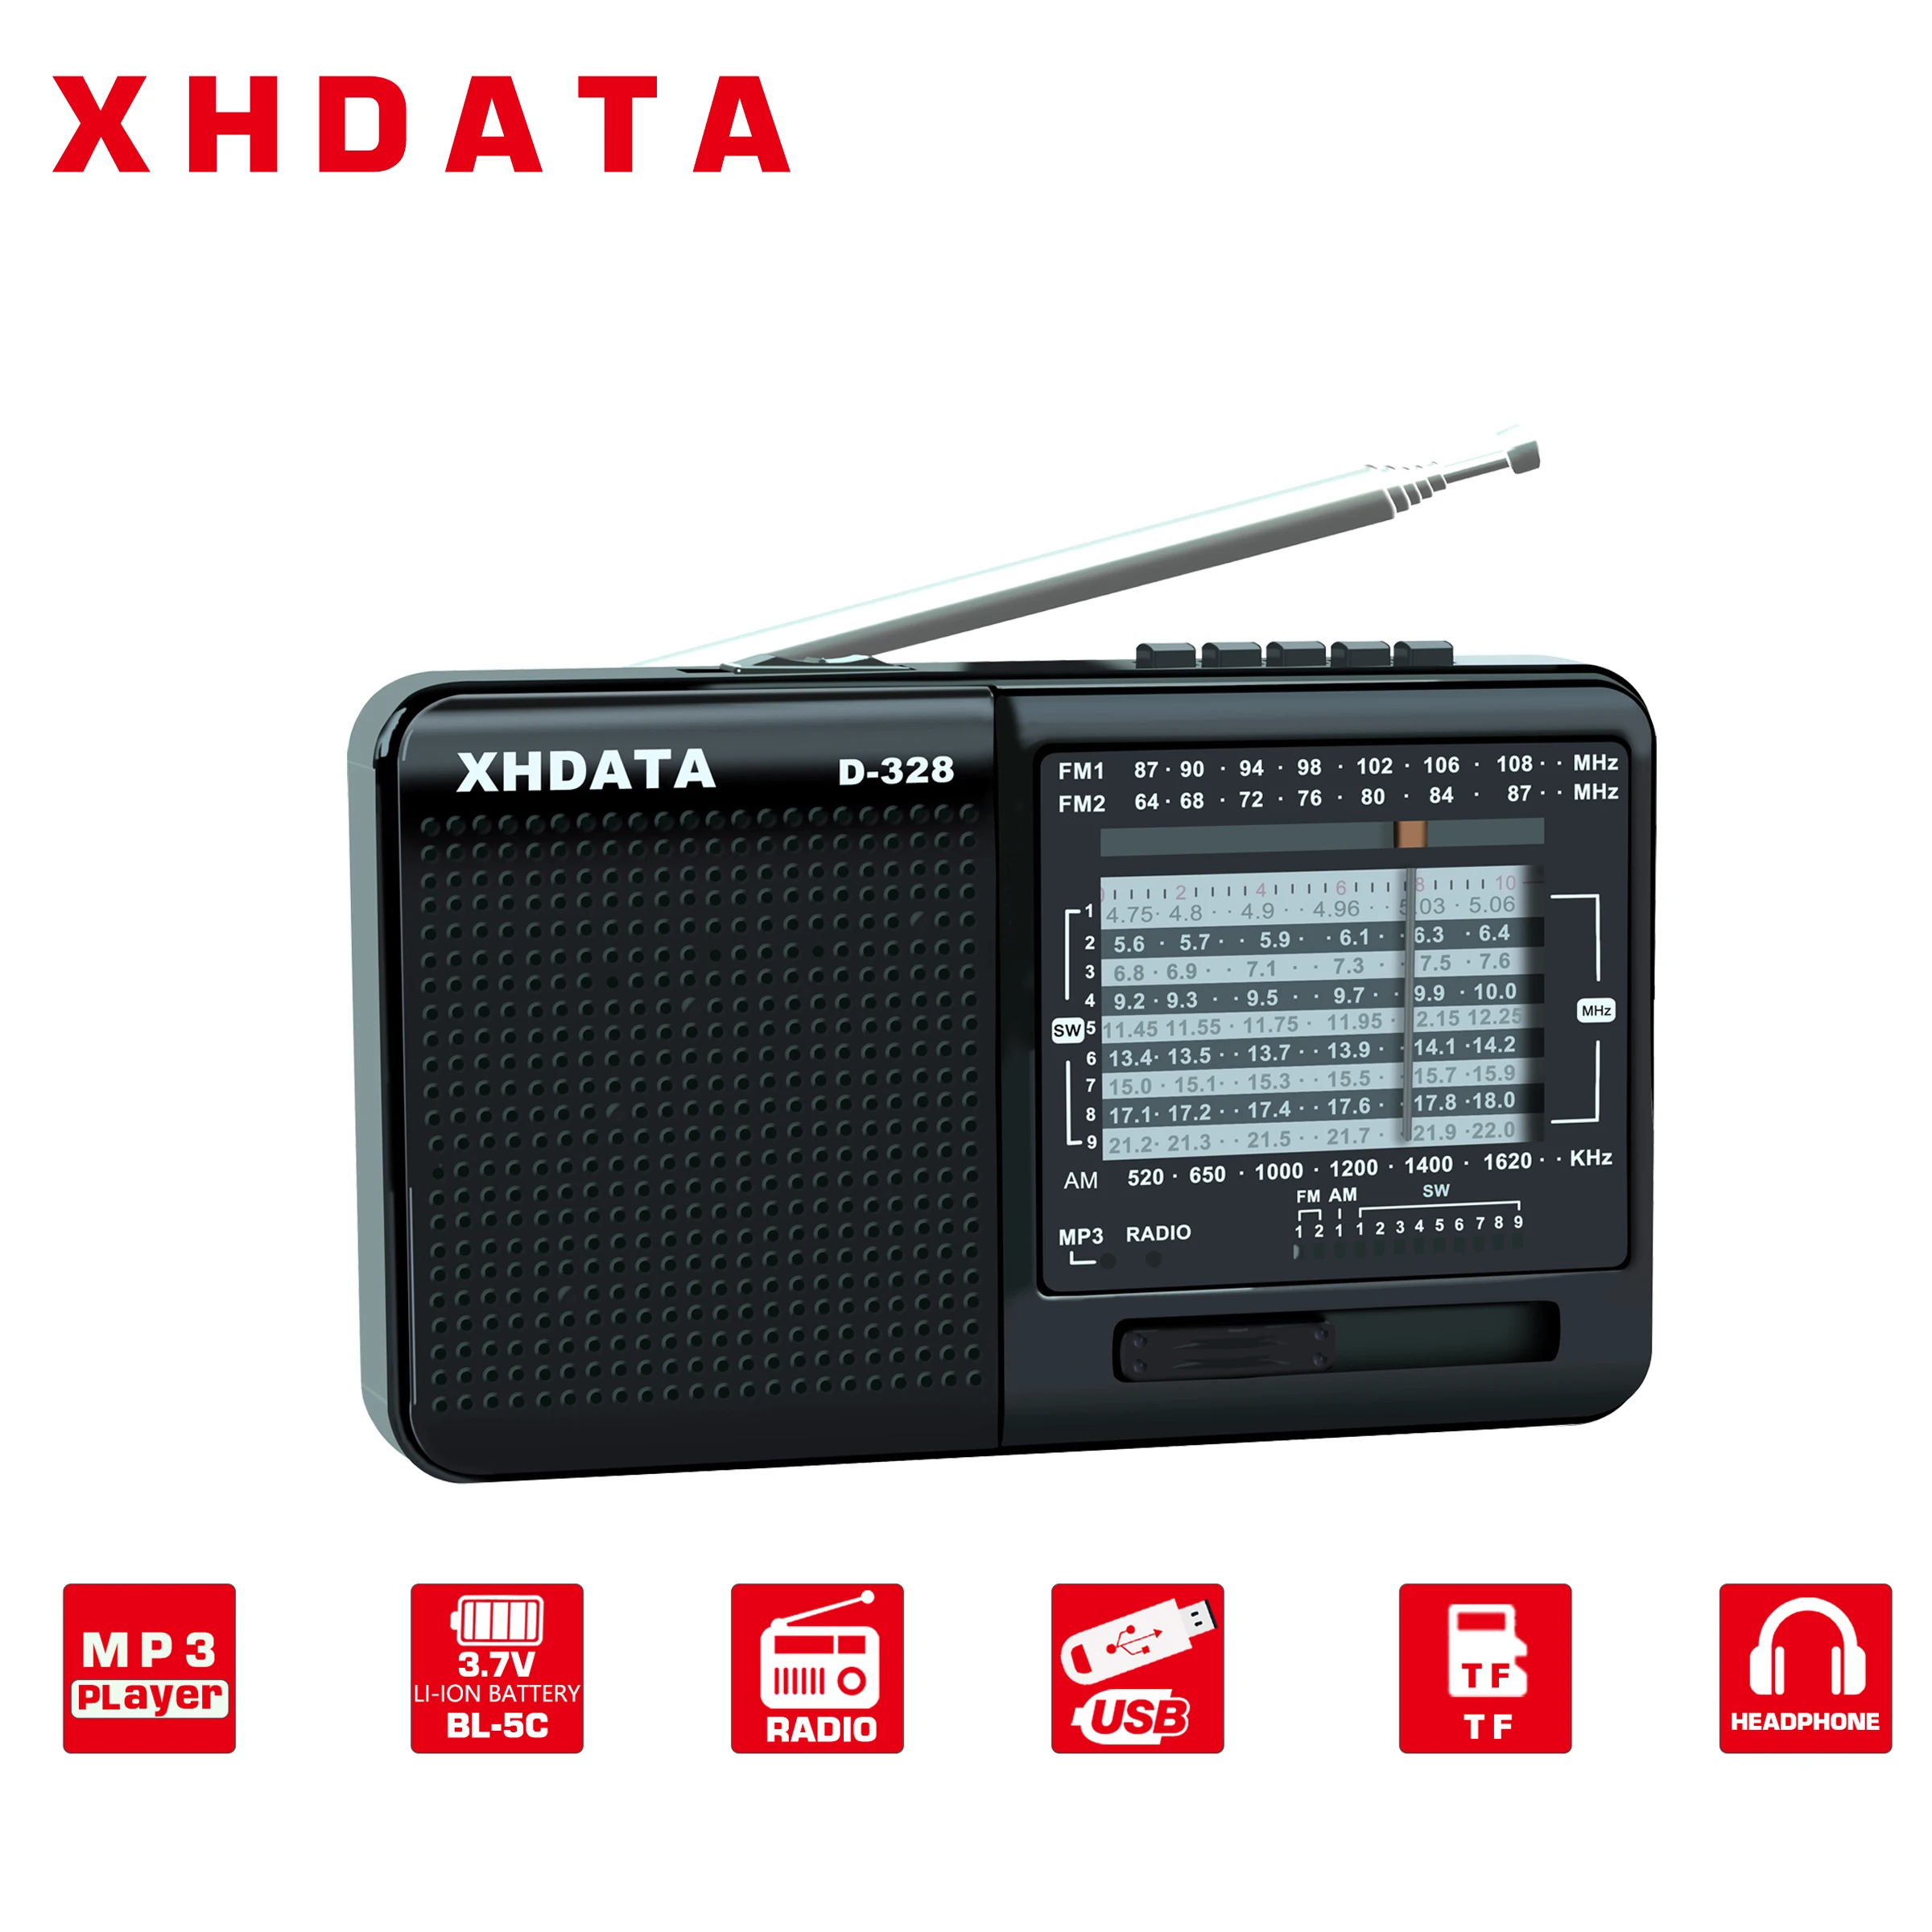 

XHDATA D-328 Portable Radio AM FM SW 12 Bands Pocket Radio with DSP/MP3 Music Player and TF Card Slot USB Mini FM Radio Receiver